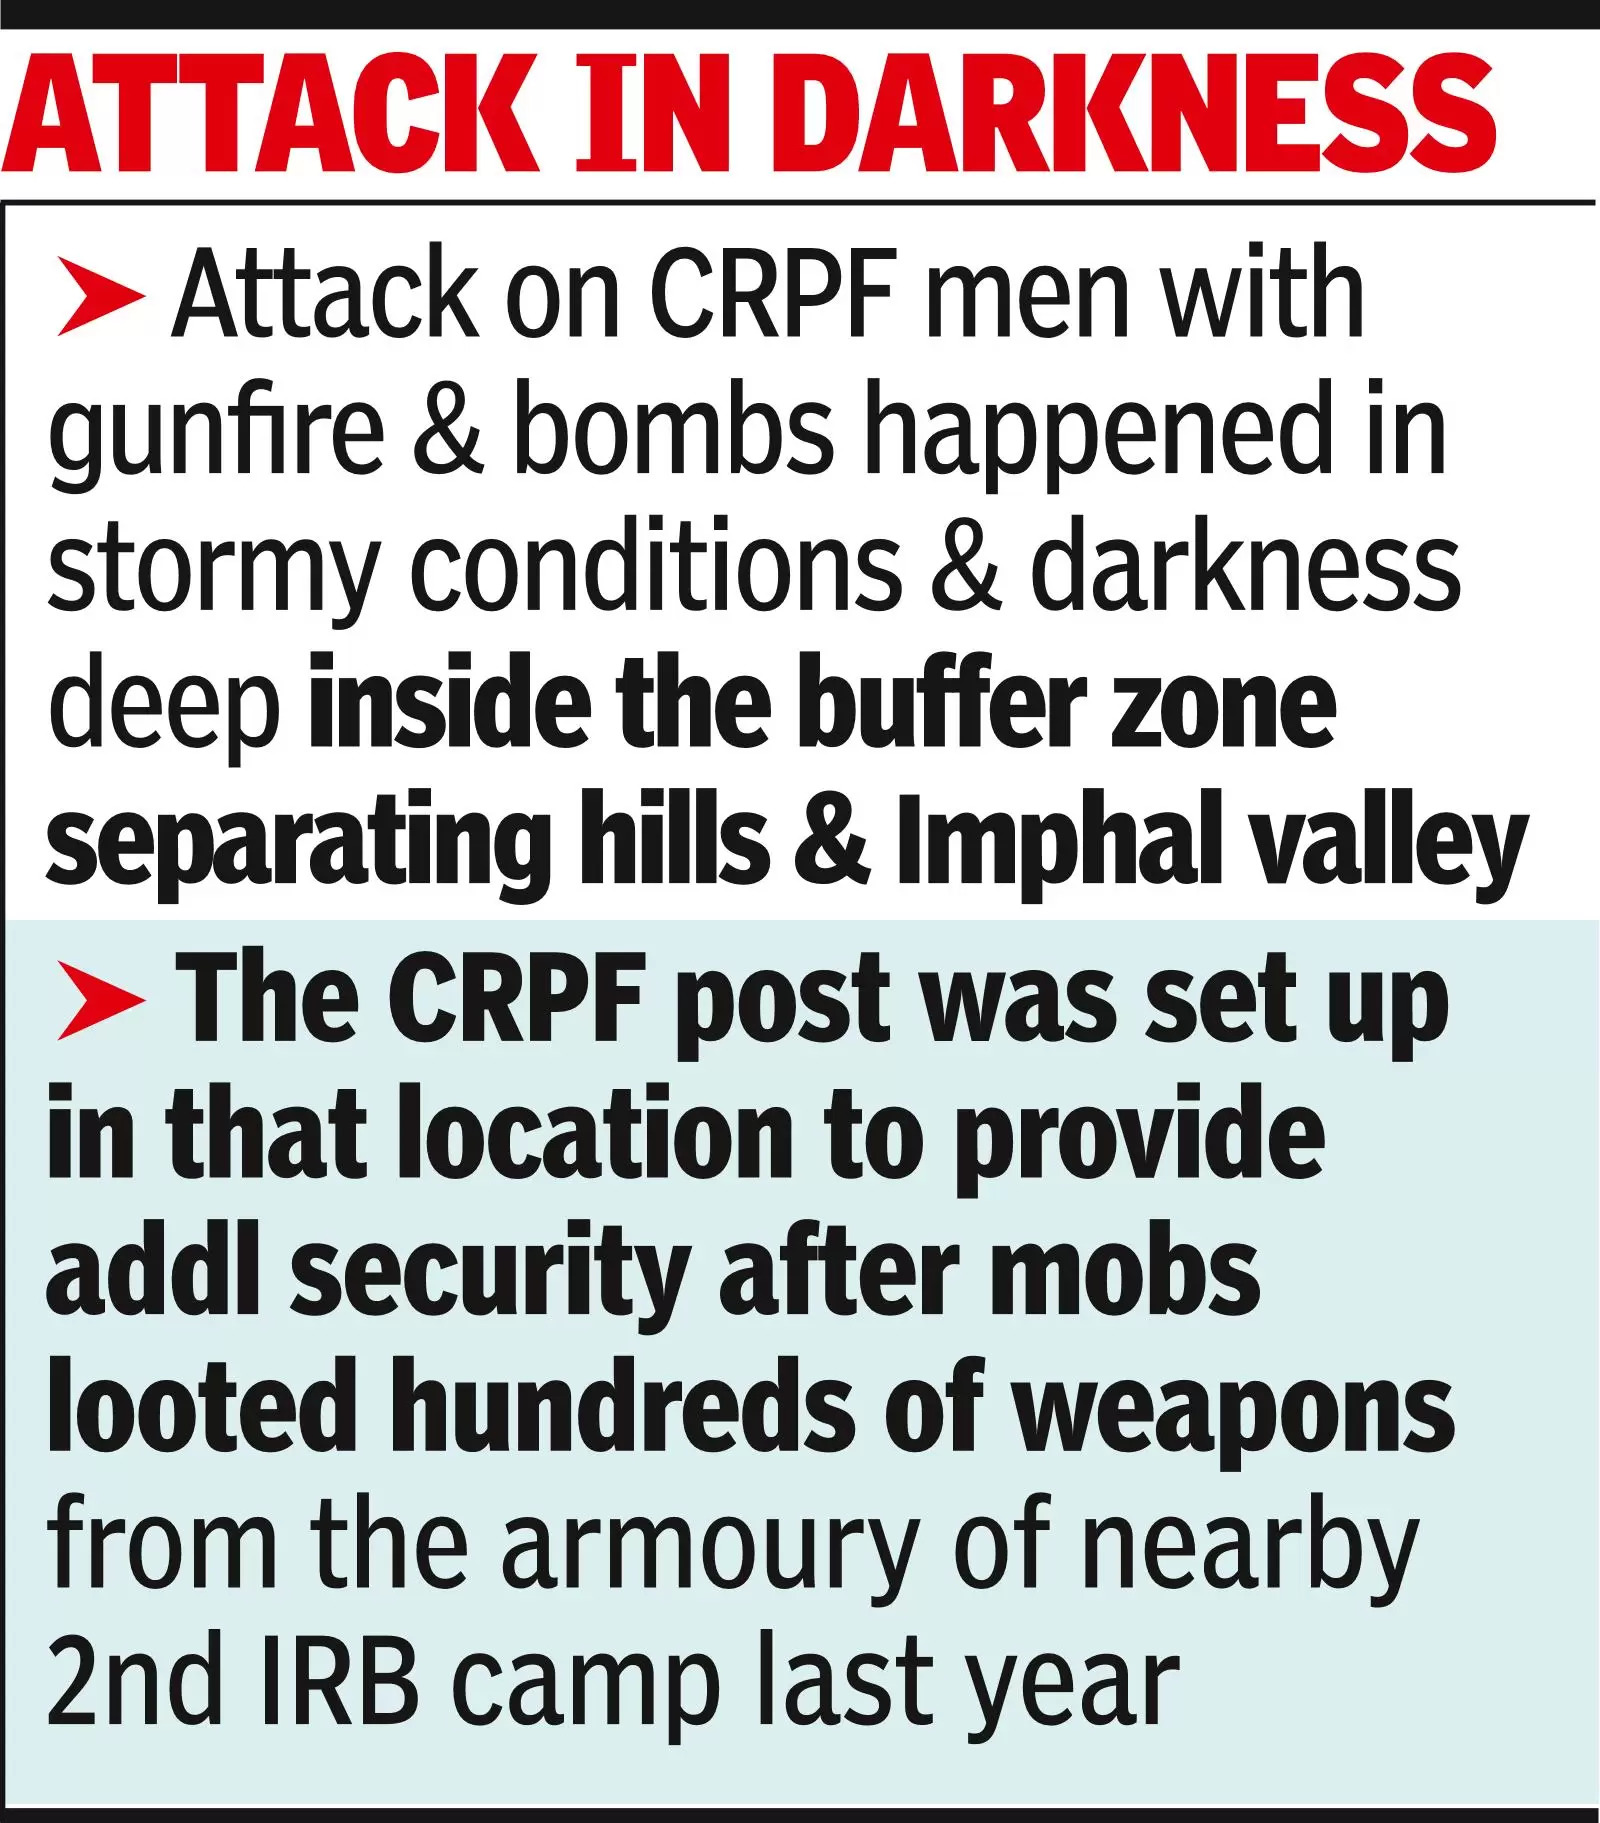 Two CRPF men killed in Manipur attack, 1st strike on peacekeepers in state